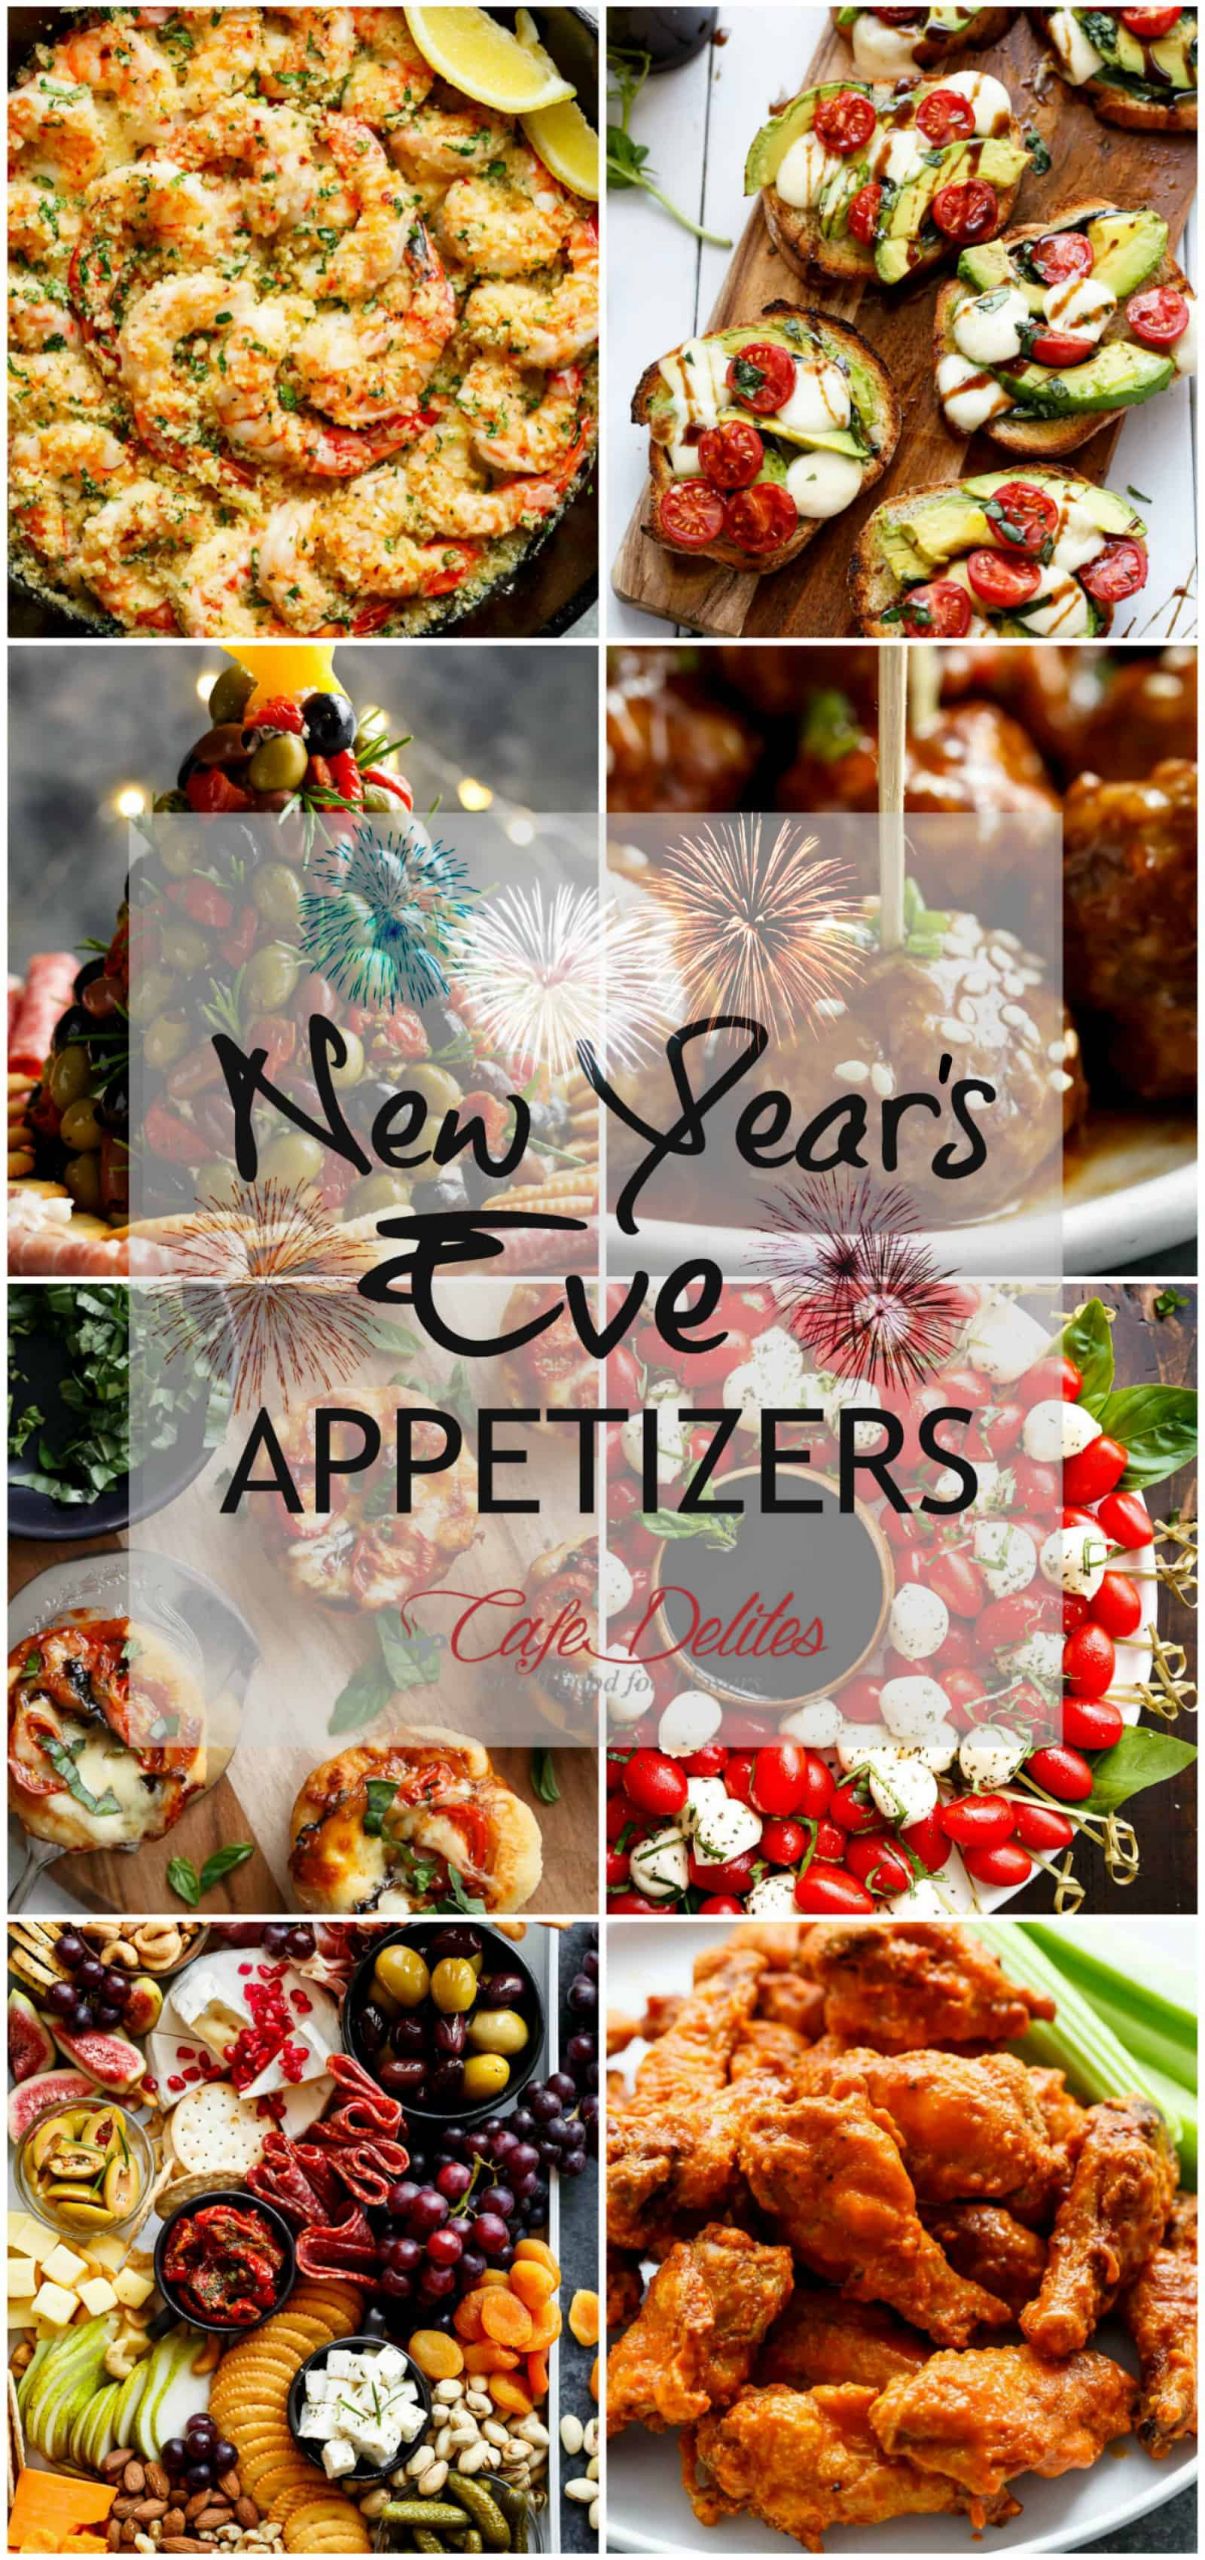 Appetizers For New Years
 The Best New Year’s Eve Appetizers Cravings Happen